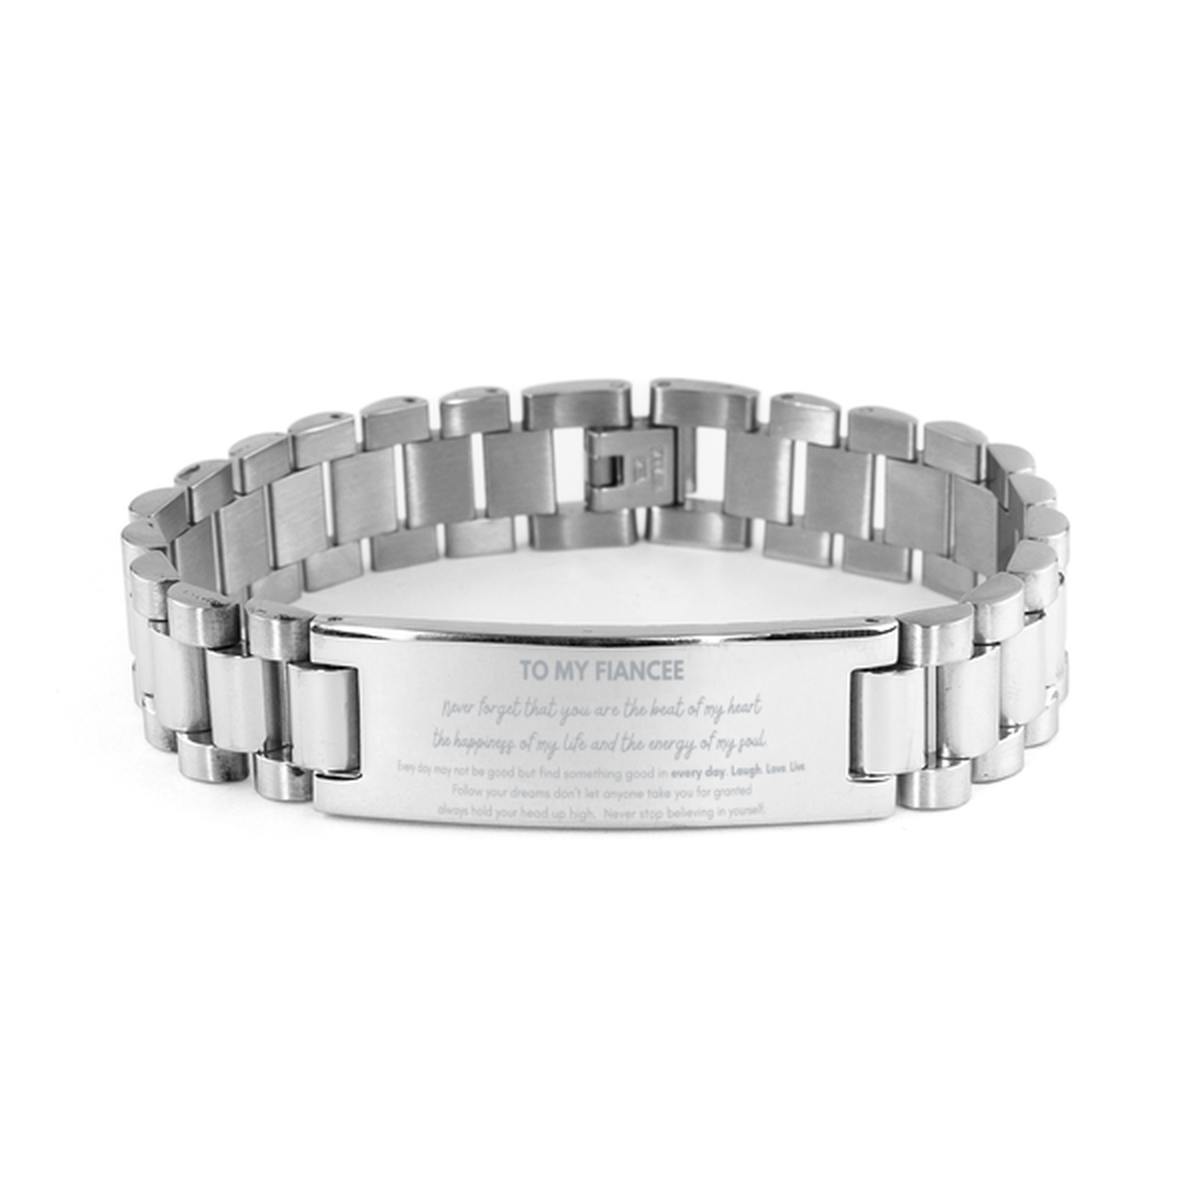 To My Fiancee Bracelet Gifts, Christmas Fiancee Ladder Stainless Steel Bracelet Present, Birthday Unique Motivational For Fiancee, To My Fiancee Never forget that you are the beat of my heart the happiness of my life and the energy of my soul